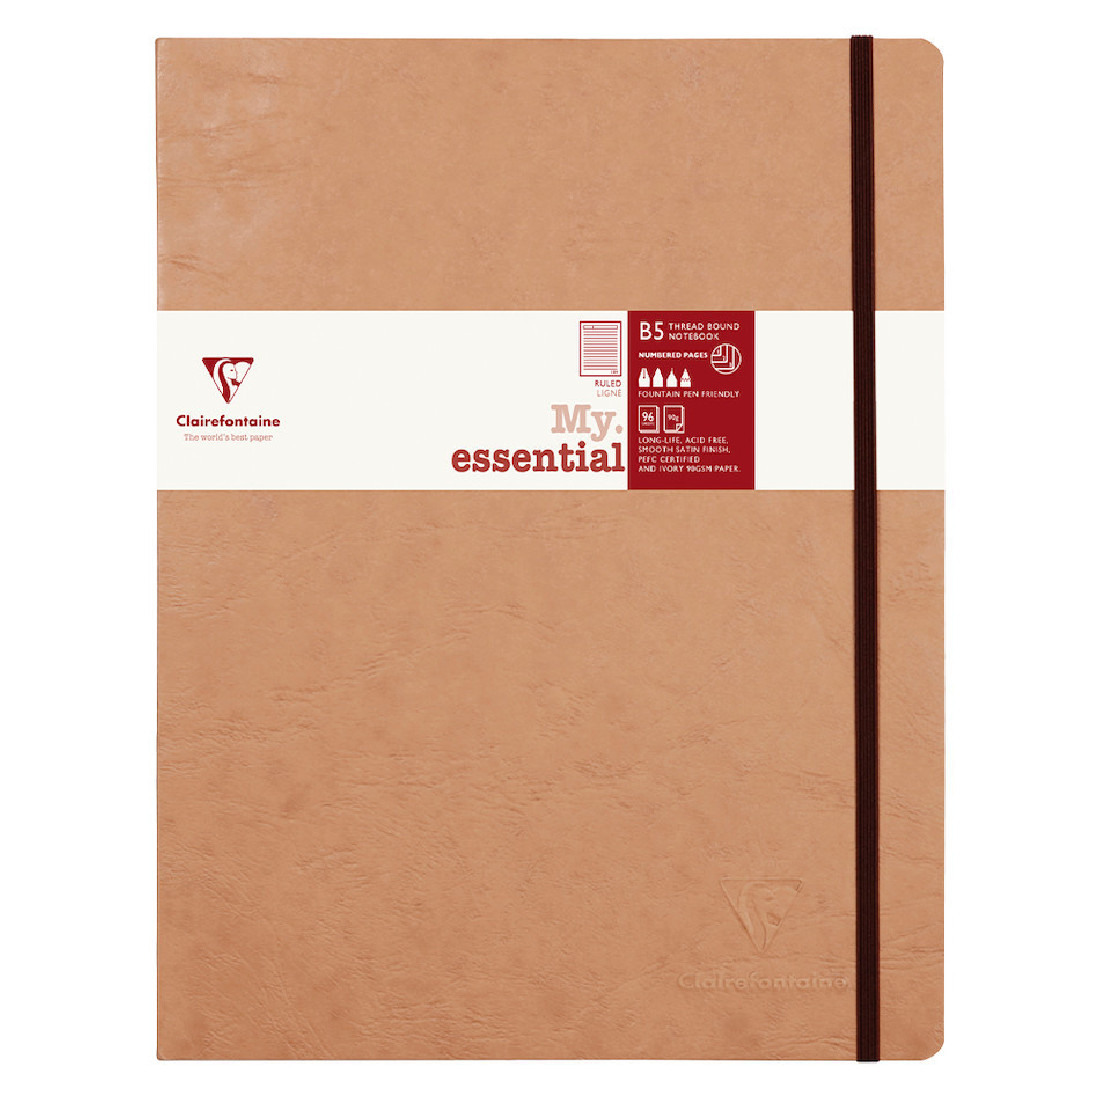 Clairefontaine notebook my.essential B5 19X25 cm, craft, lined,  90g